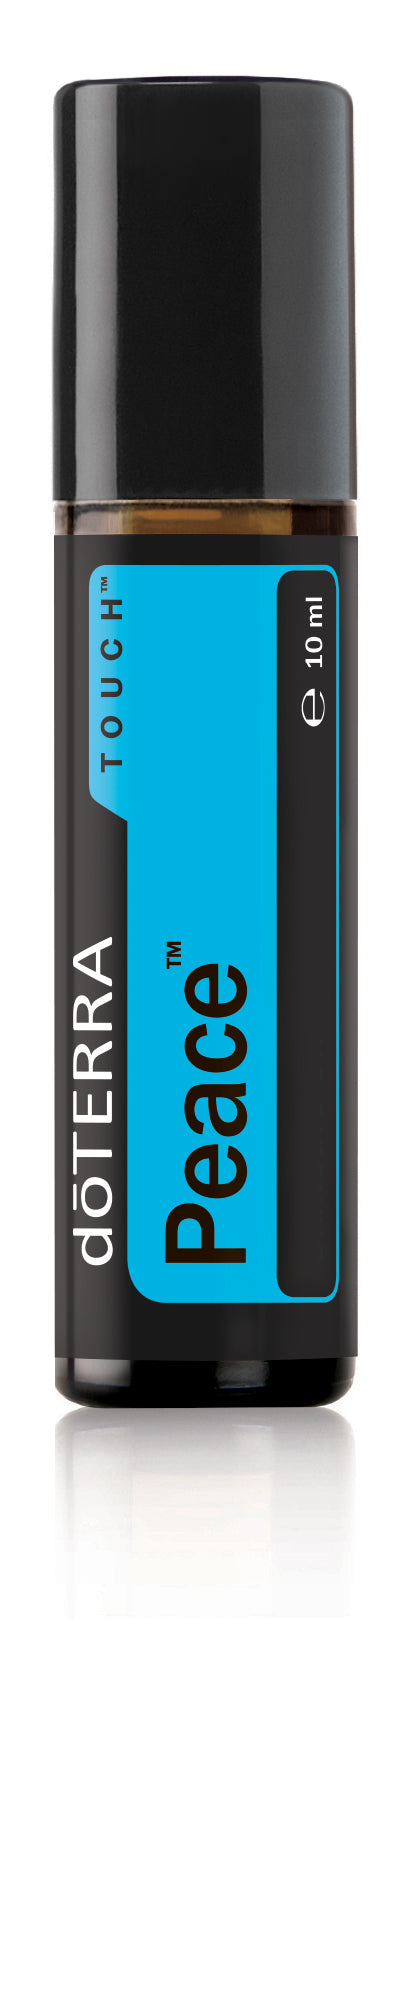 Peace Touch Rollerball - Reassuring Blend